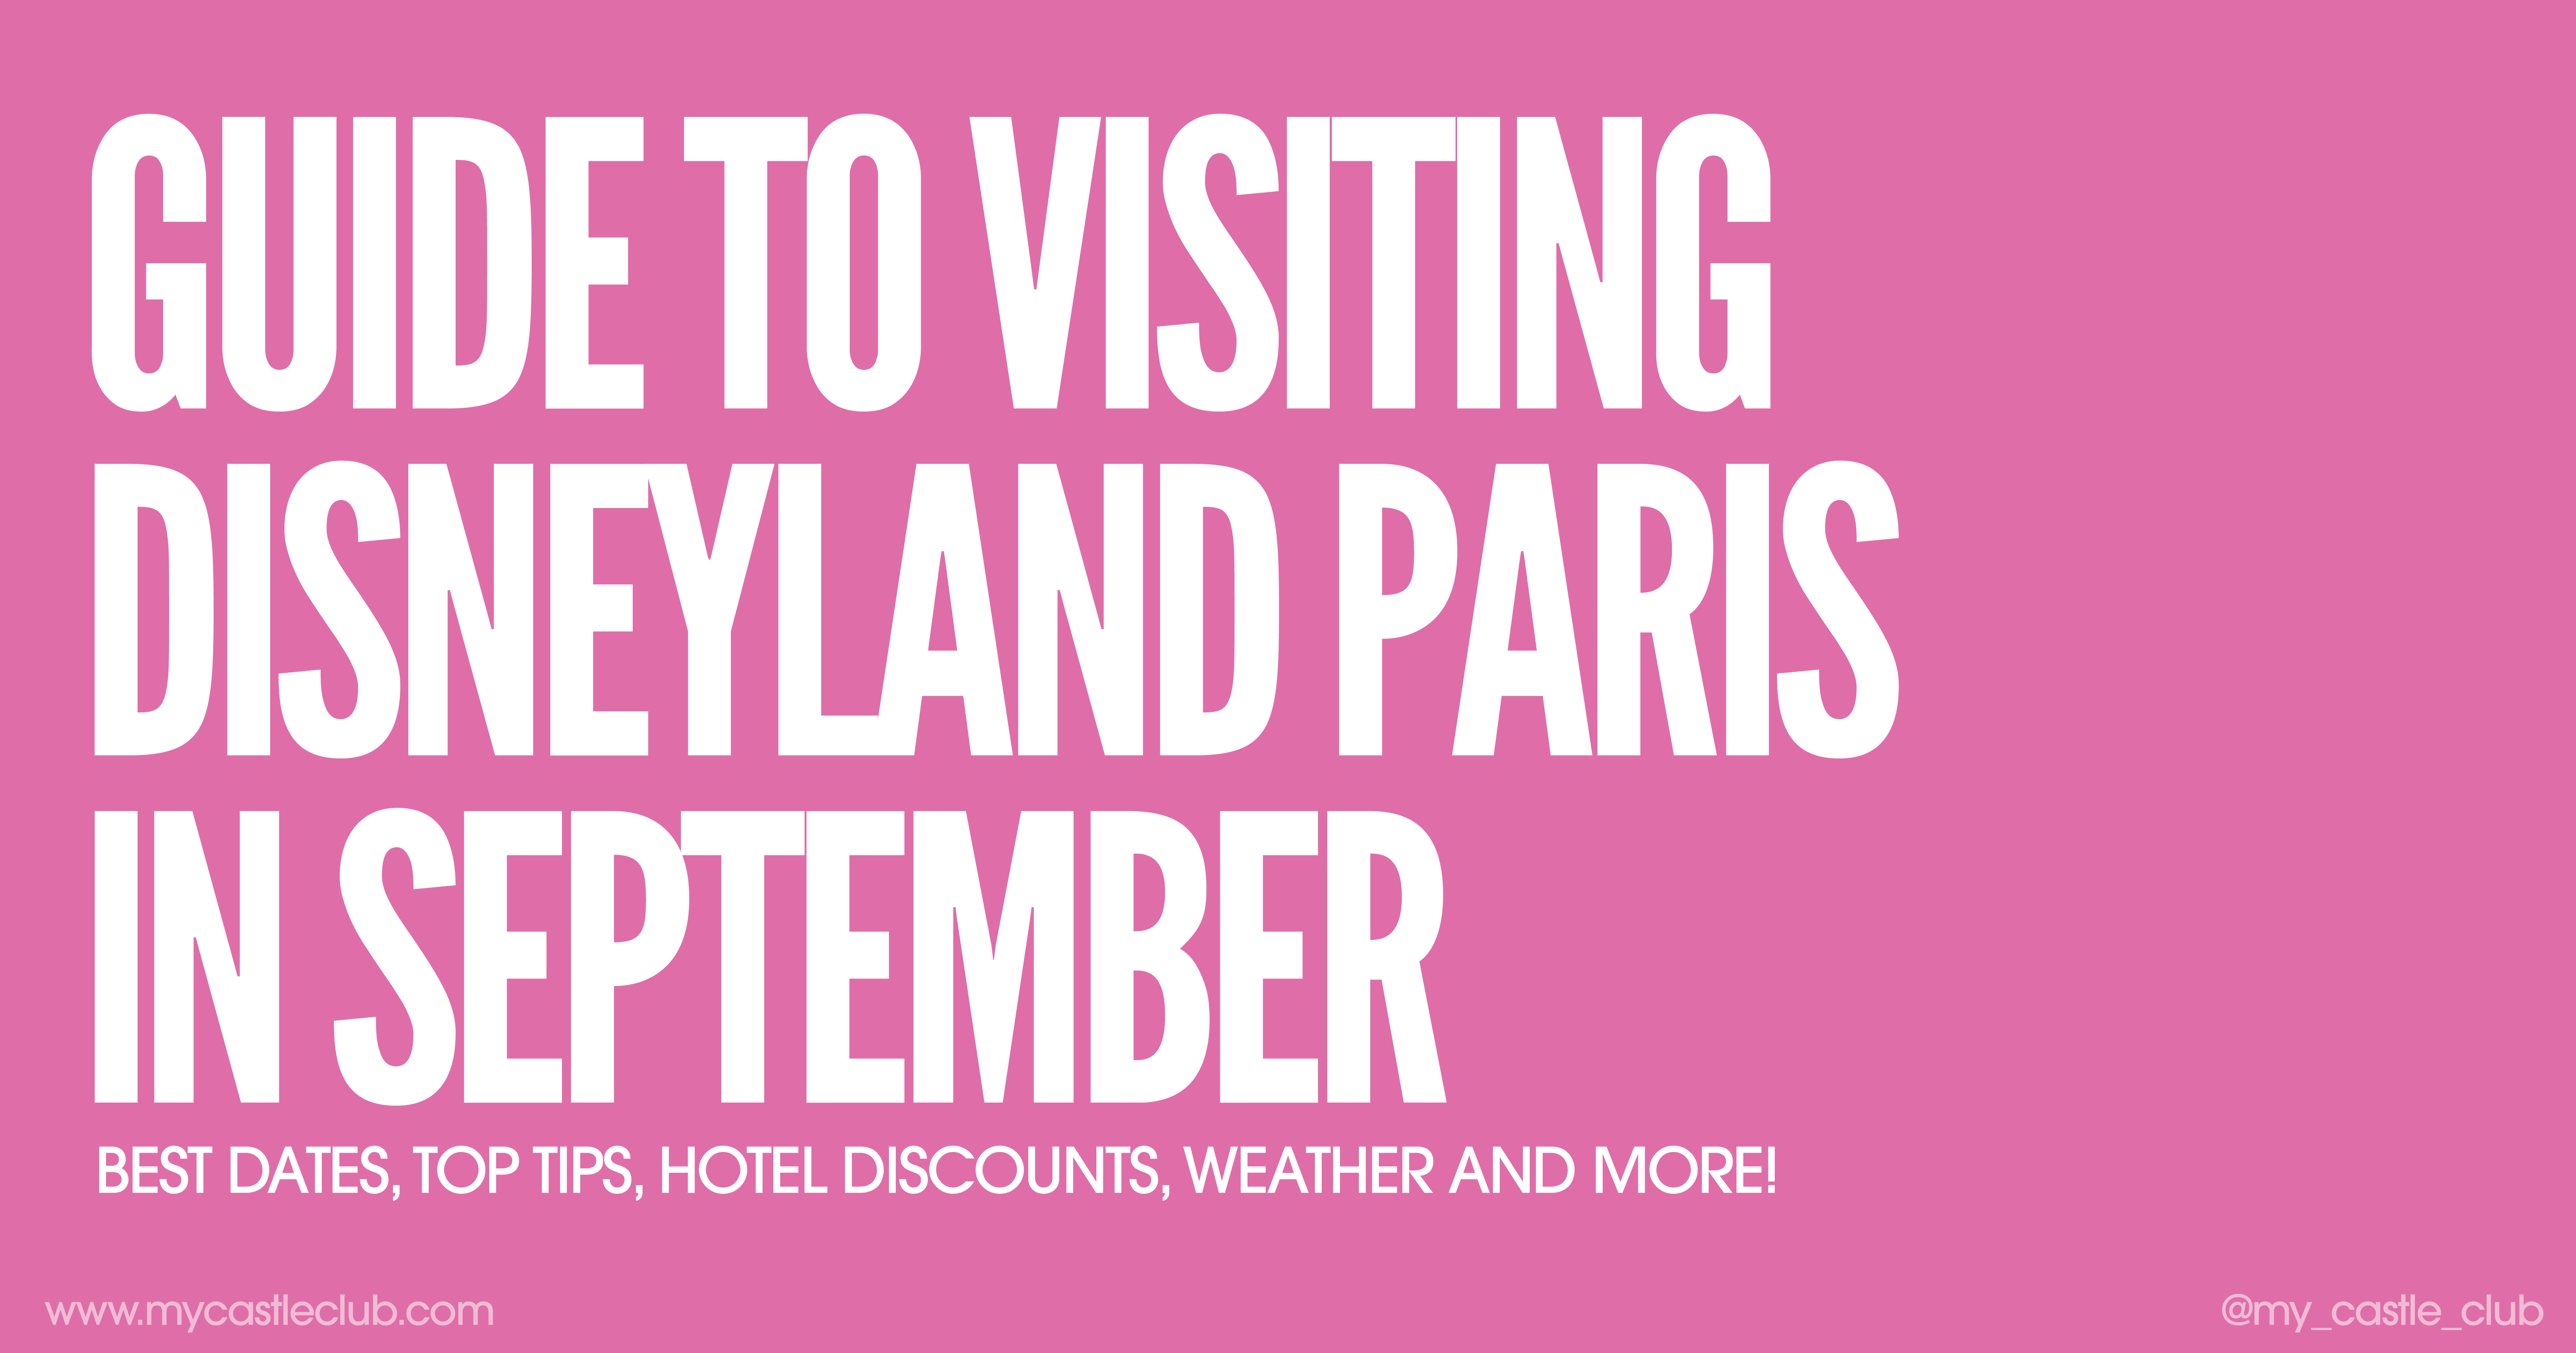 Visiting Disneyland Paris in September, Best Dates, Top Tips, Hotel Discounts, Weather and more!